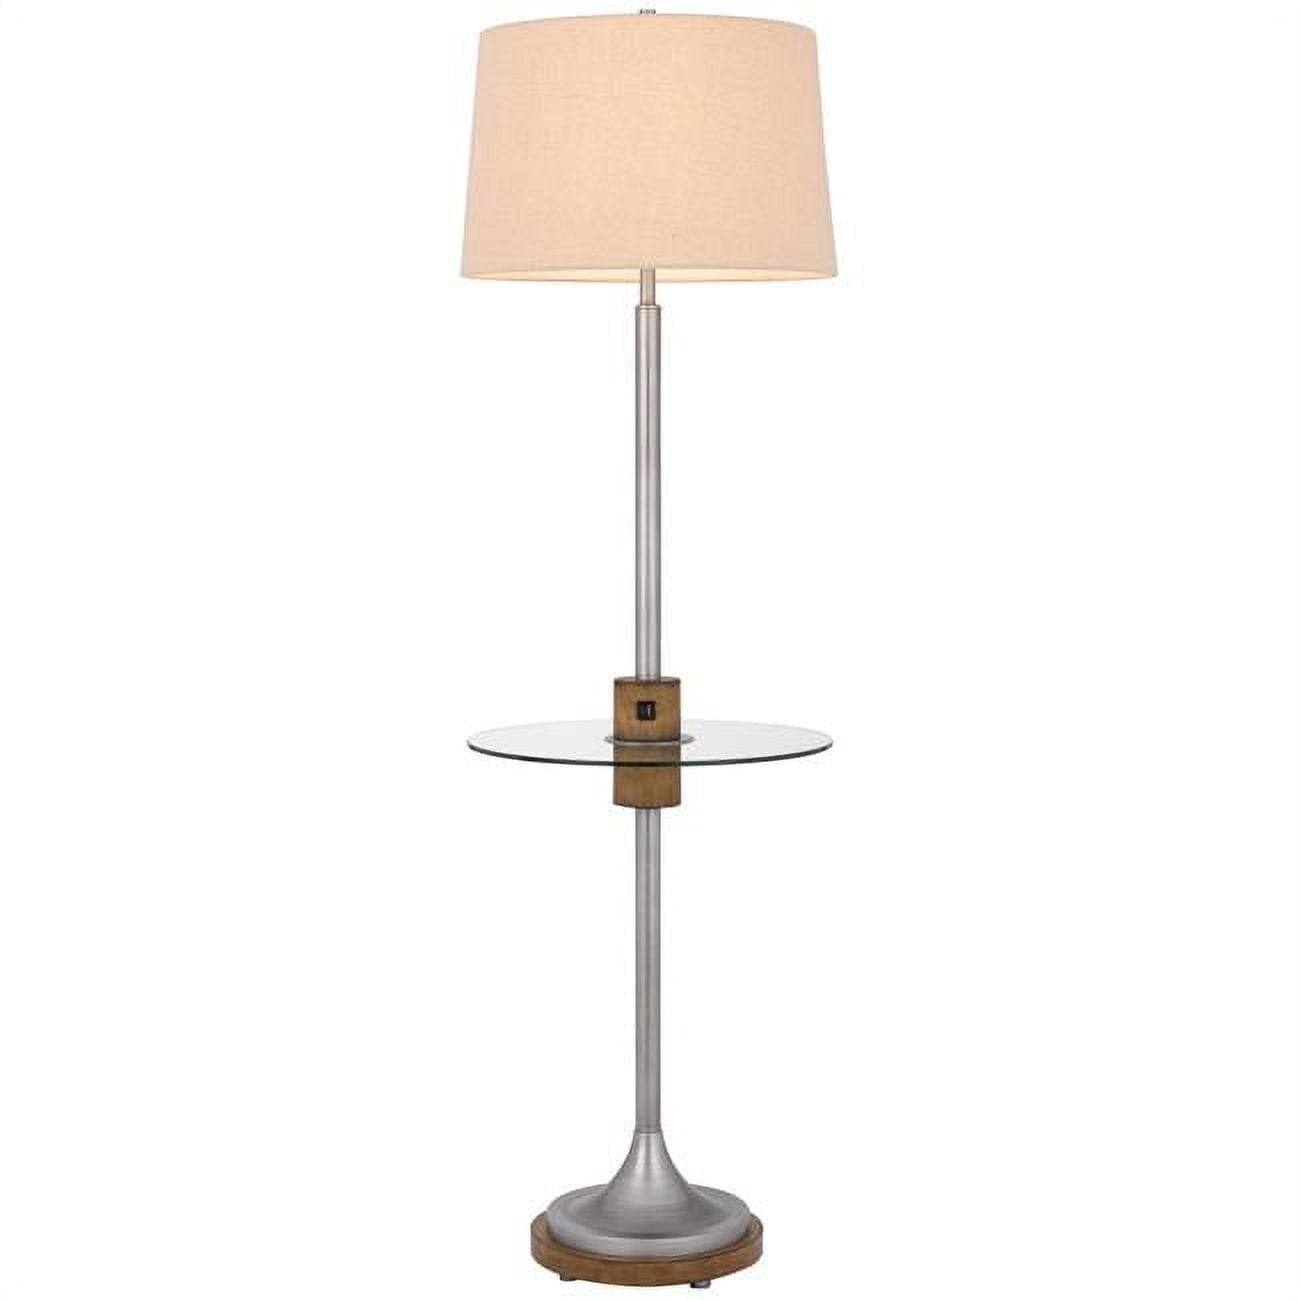 Picture of Cal Lighting BO-3057FL 150W Brushed Steel 3 Way Lavaca Metal Floor Lamp with Glass Tray Table & 1 USB 1 TYPE C USB Charging Ports & Rubber Wood Center Font & Base